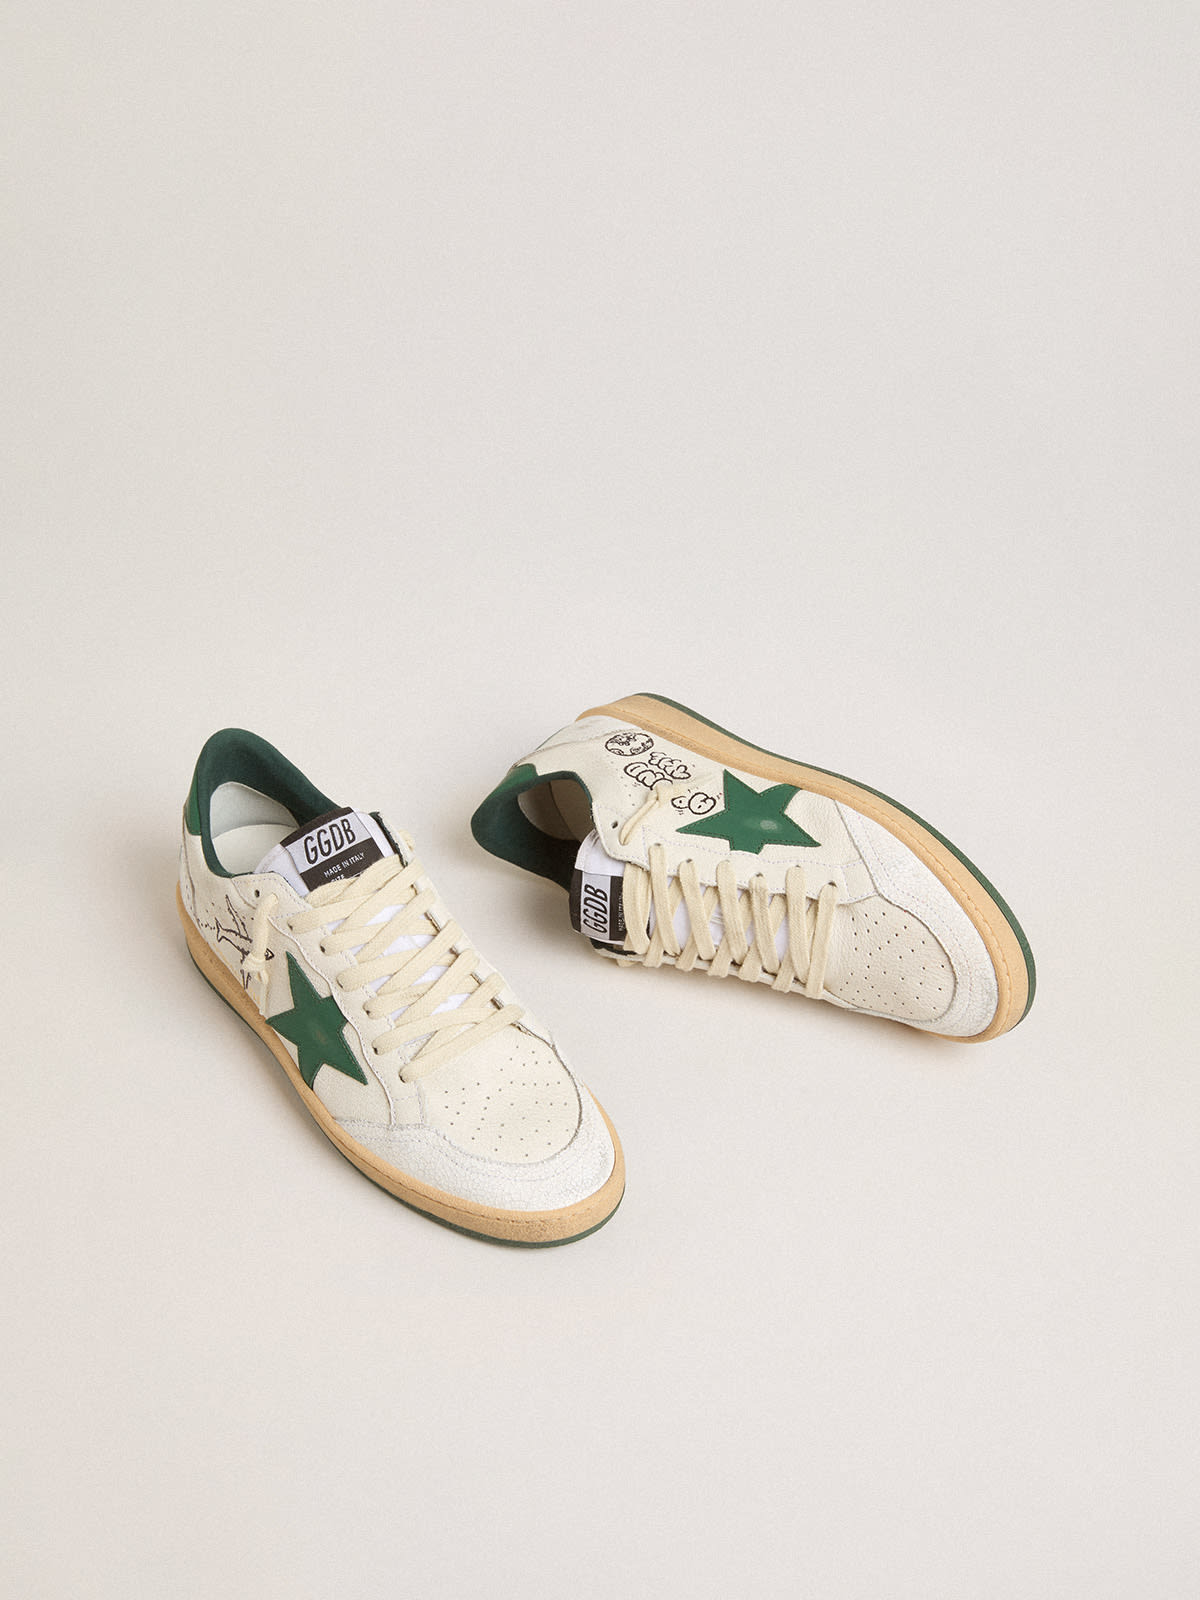 Golden Goose - Men's Ball Star Wishes in white nappa leather with green leather star and heel tab in 